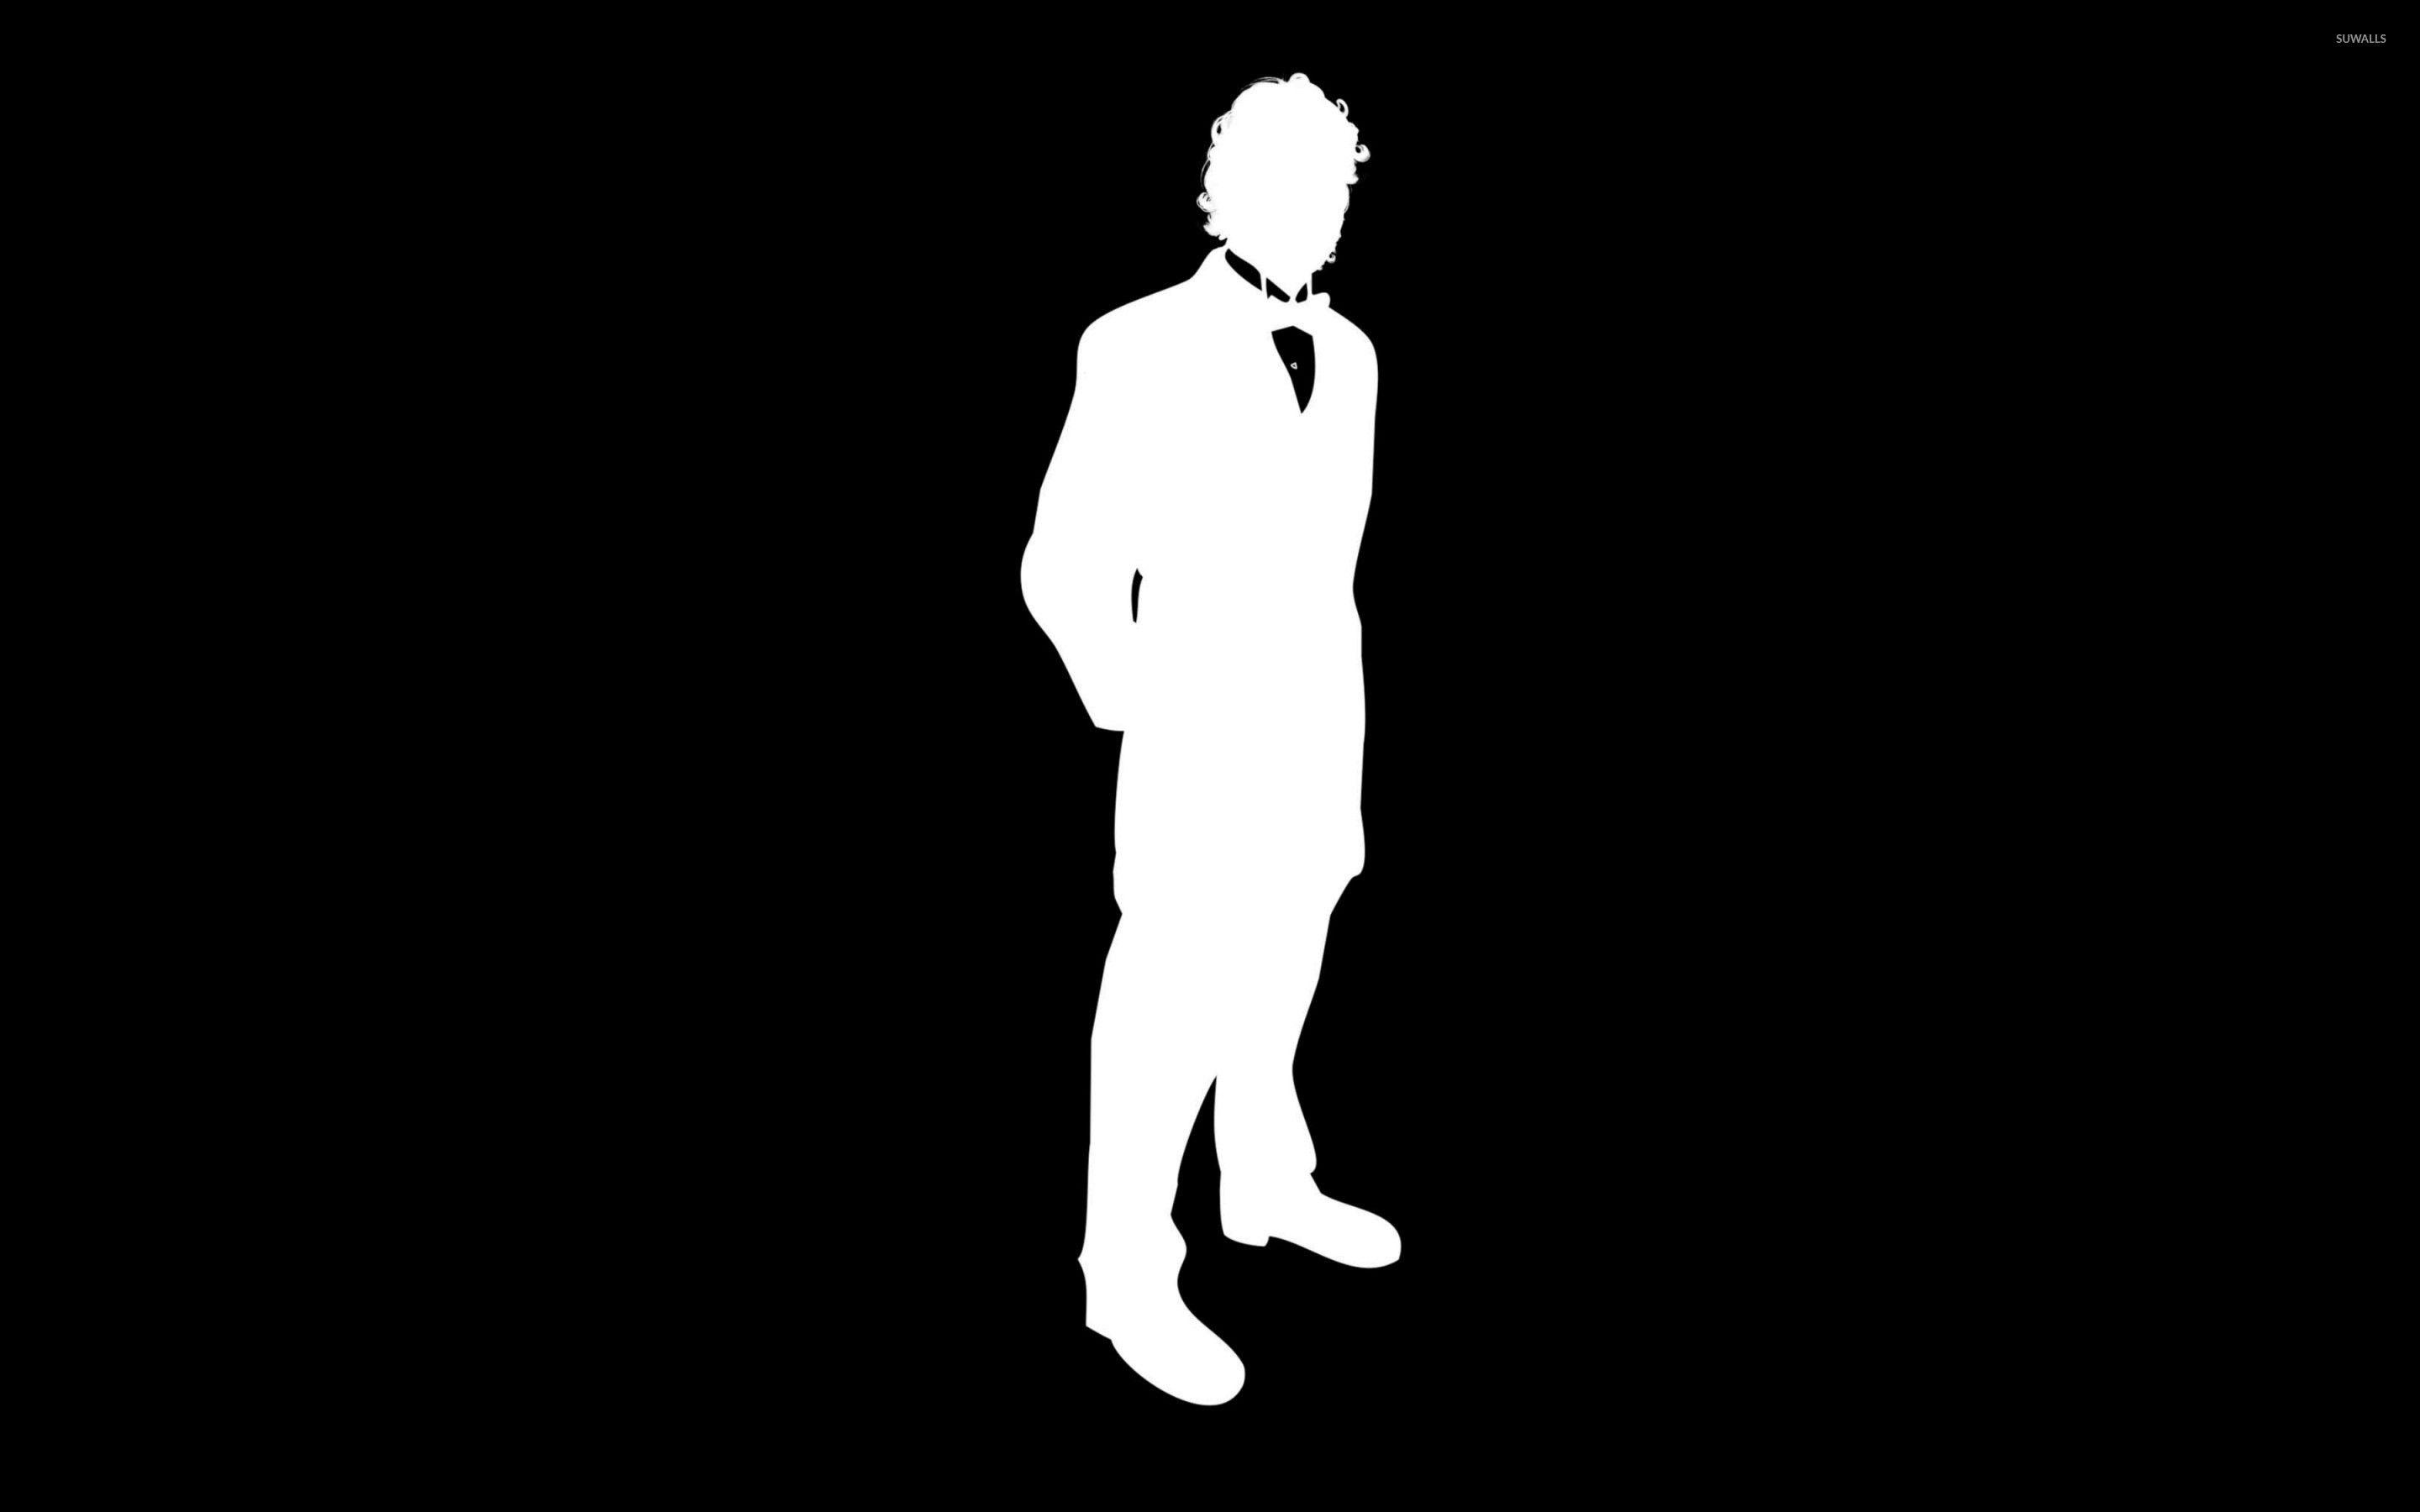 Man in a suit with bow silhouette wallpaper wallpaper